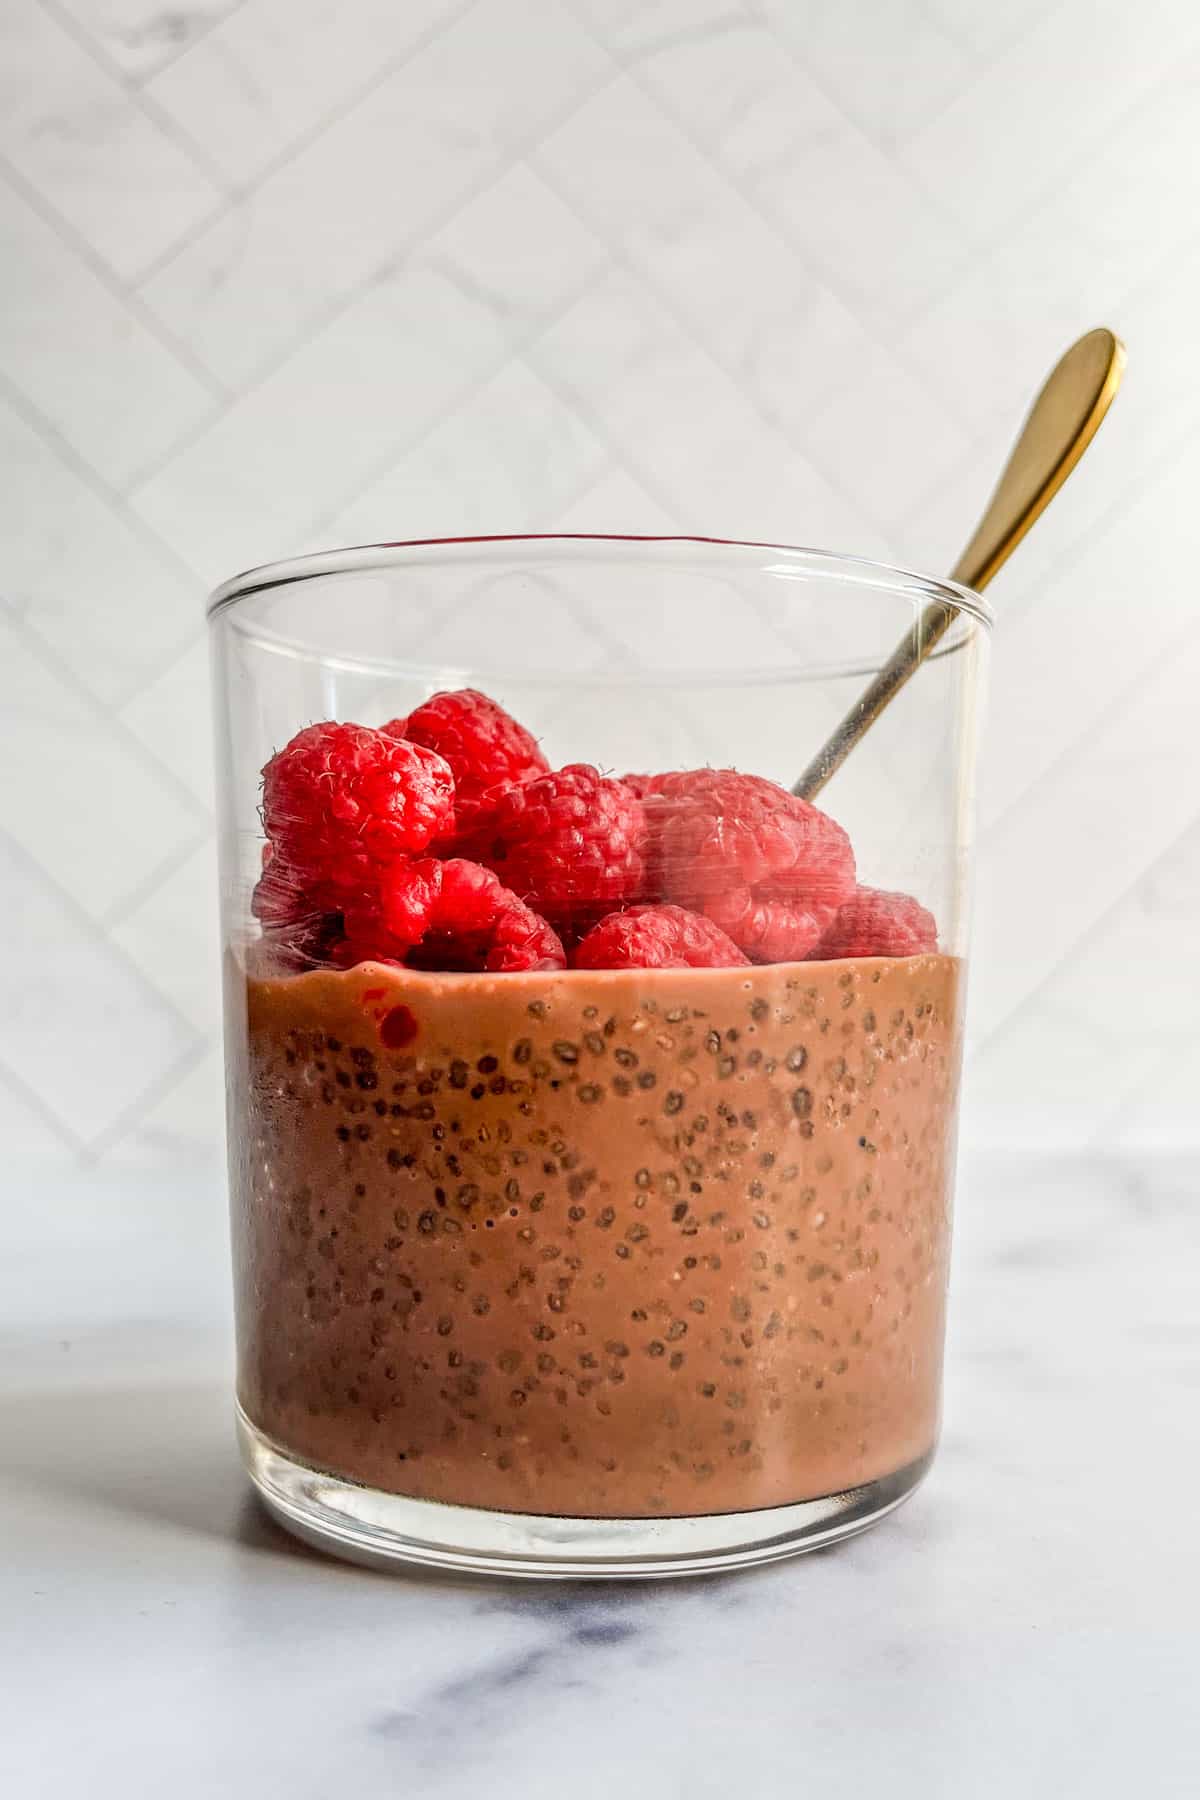 Chocolate chia seed pudding topped with raspberries in a glass.